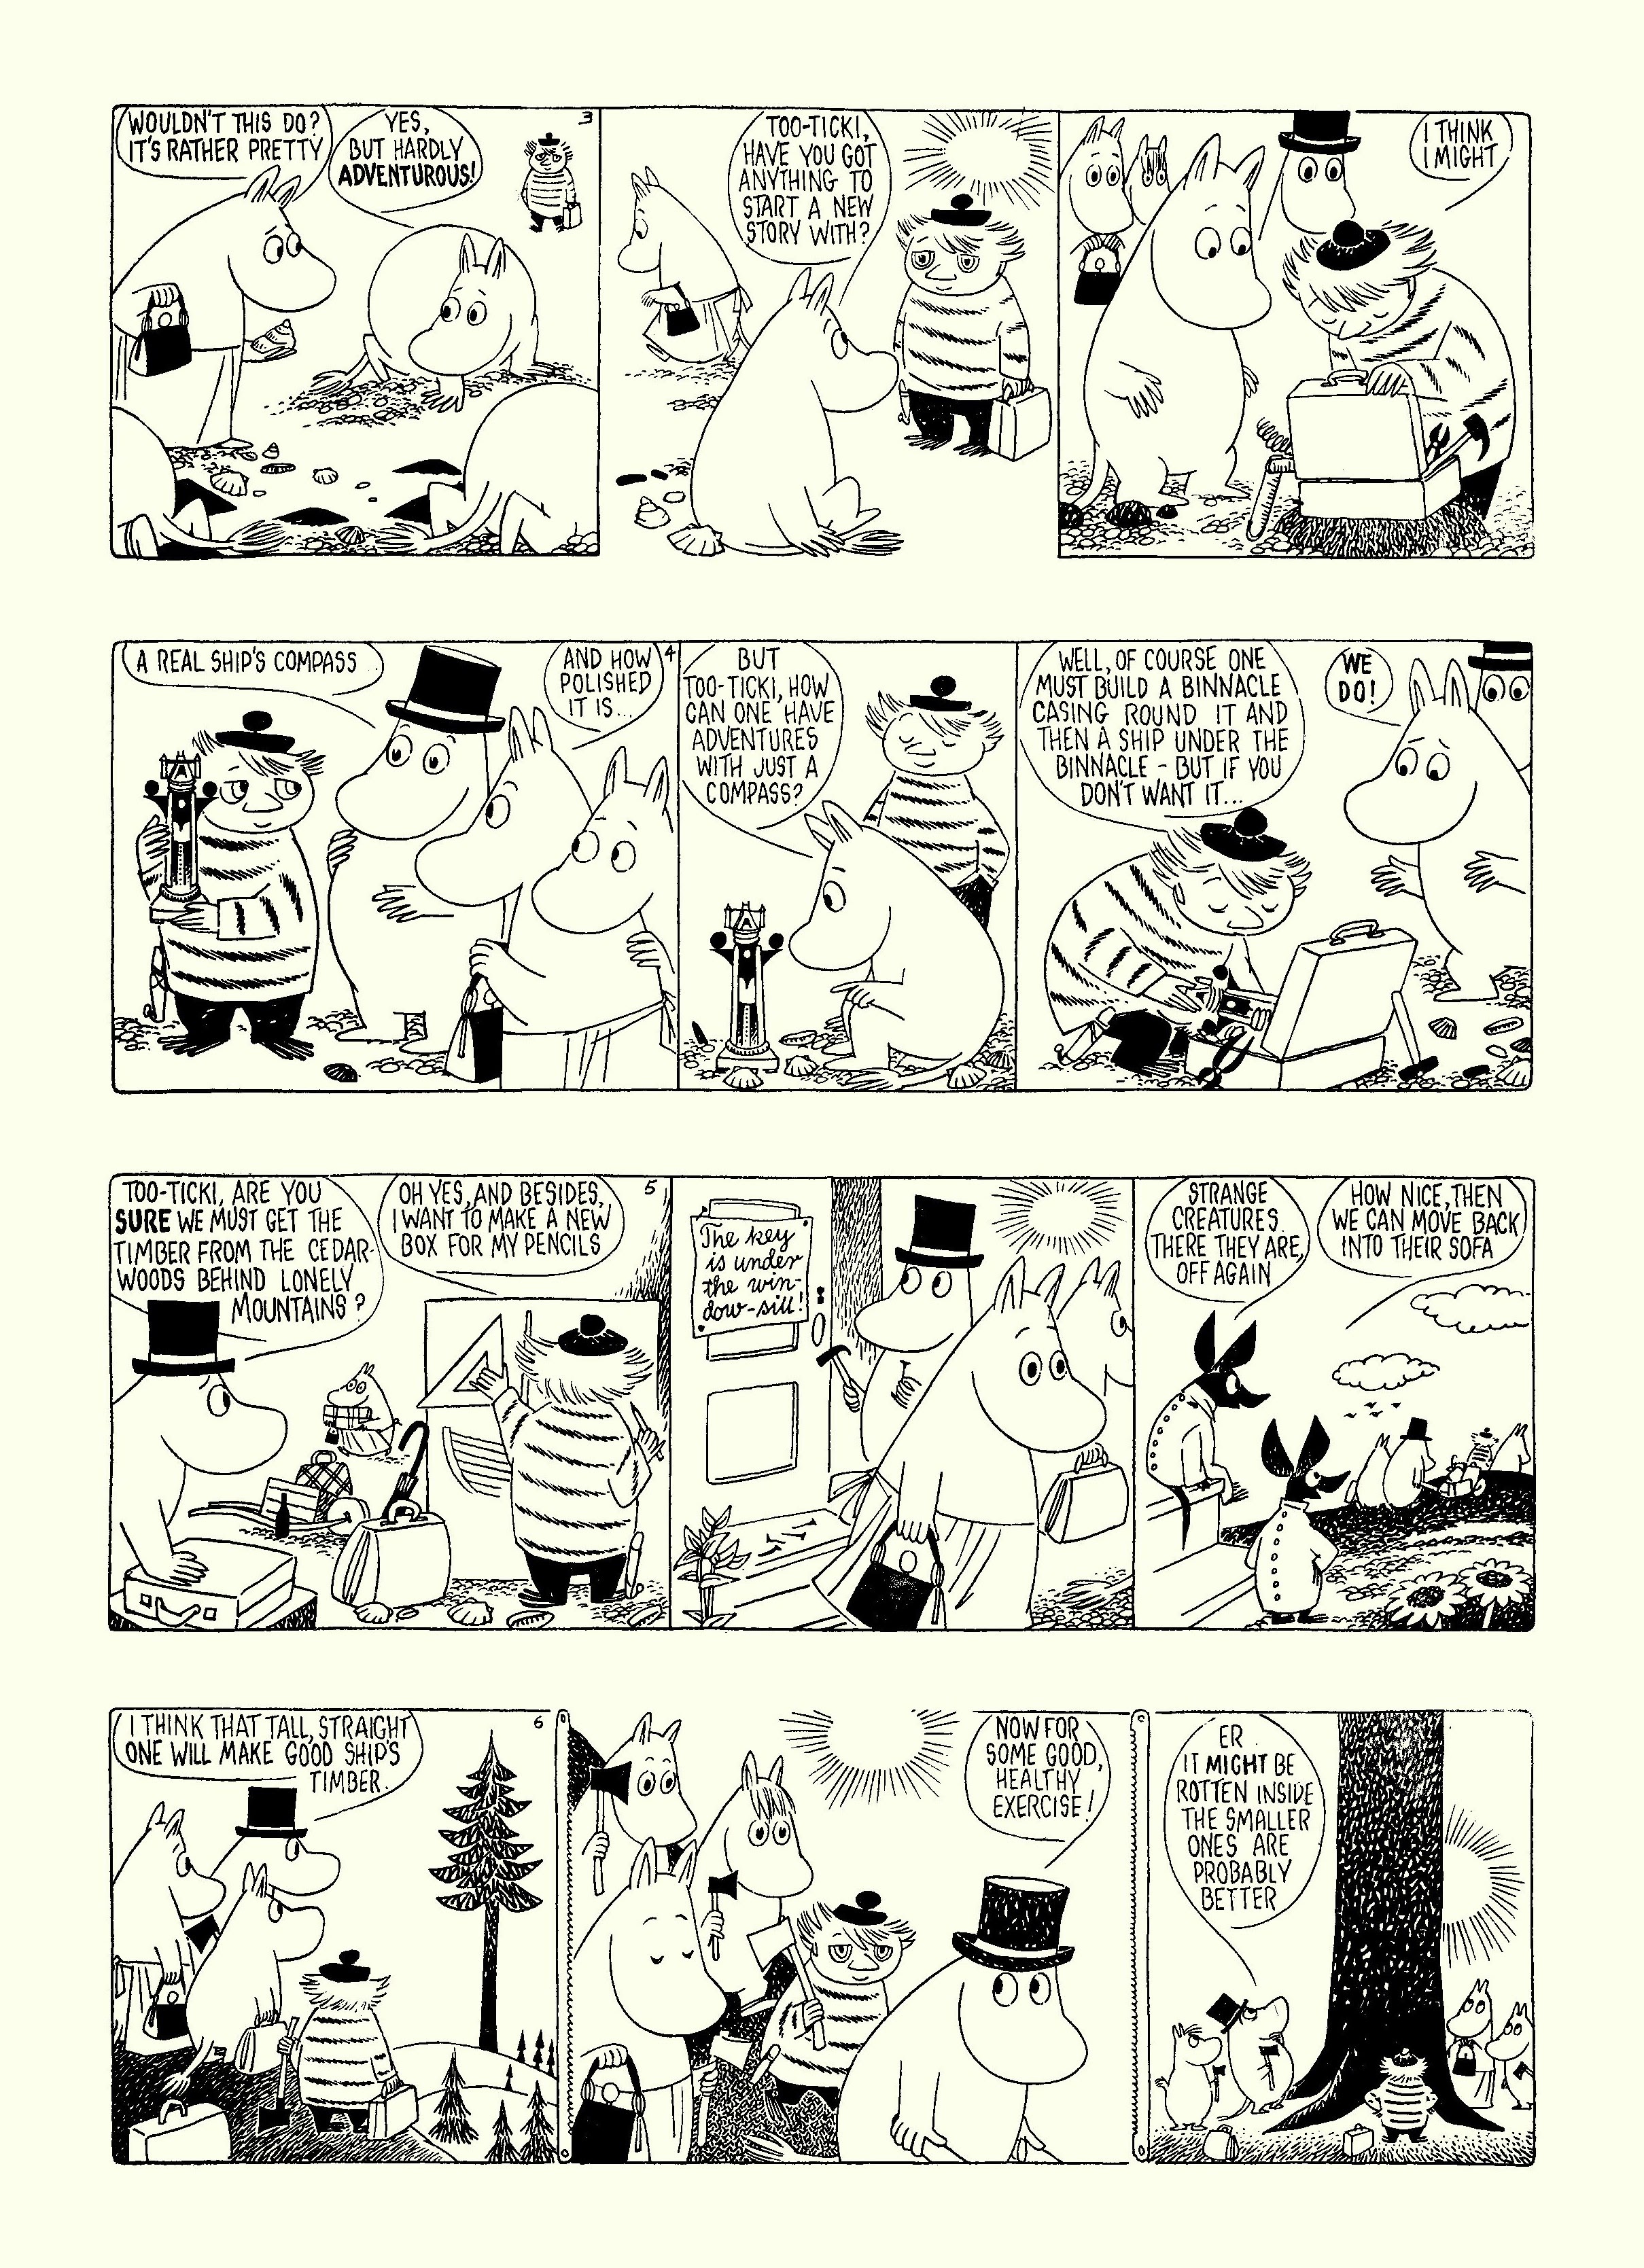 Read online Moomin: The Complete Tove Jansson Comic Strip comic -  Issue # TPB 5 - 32